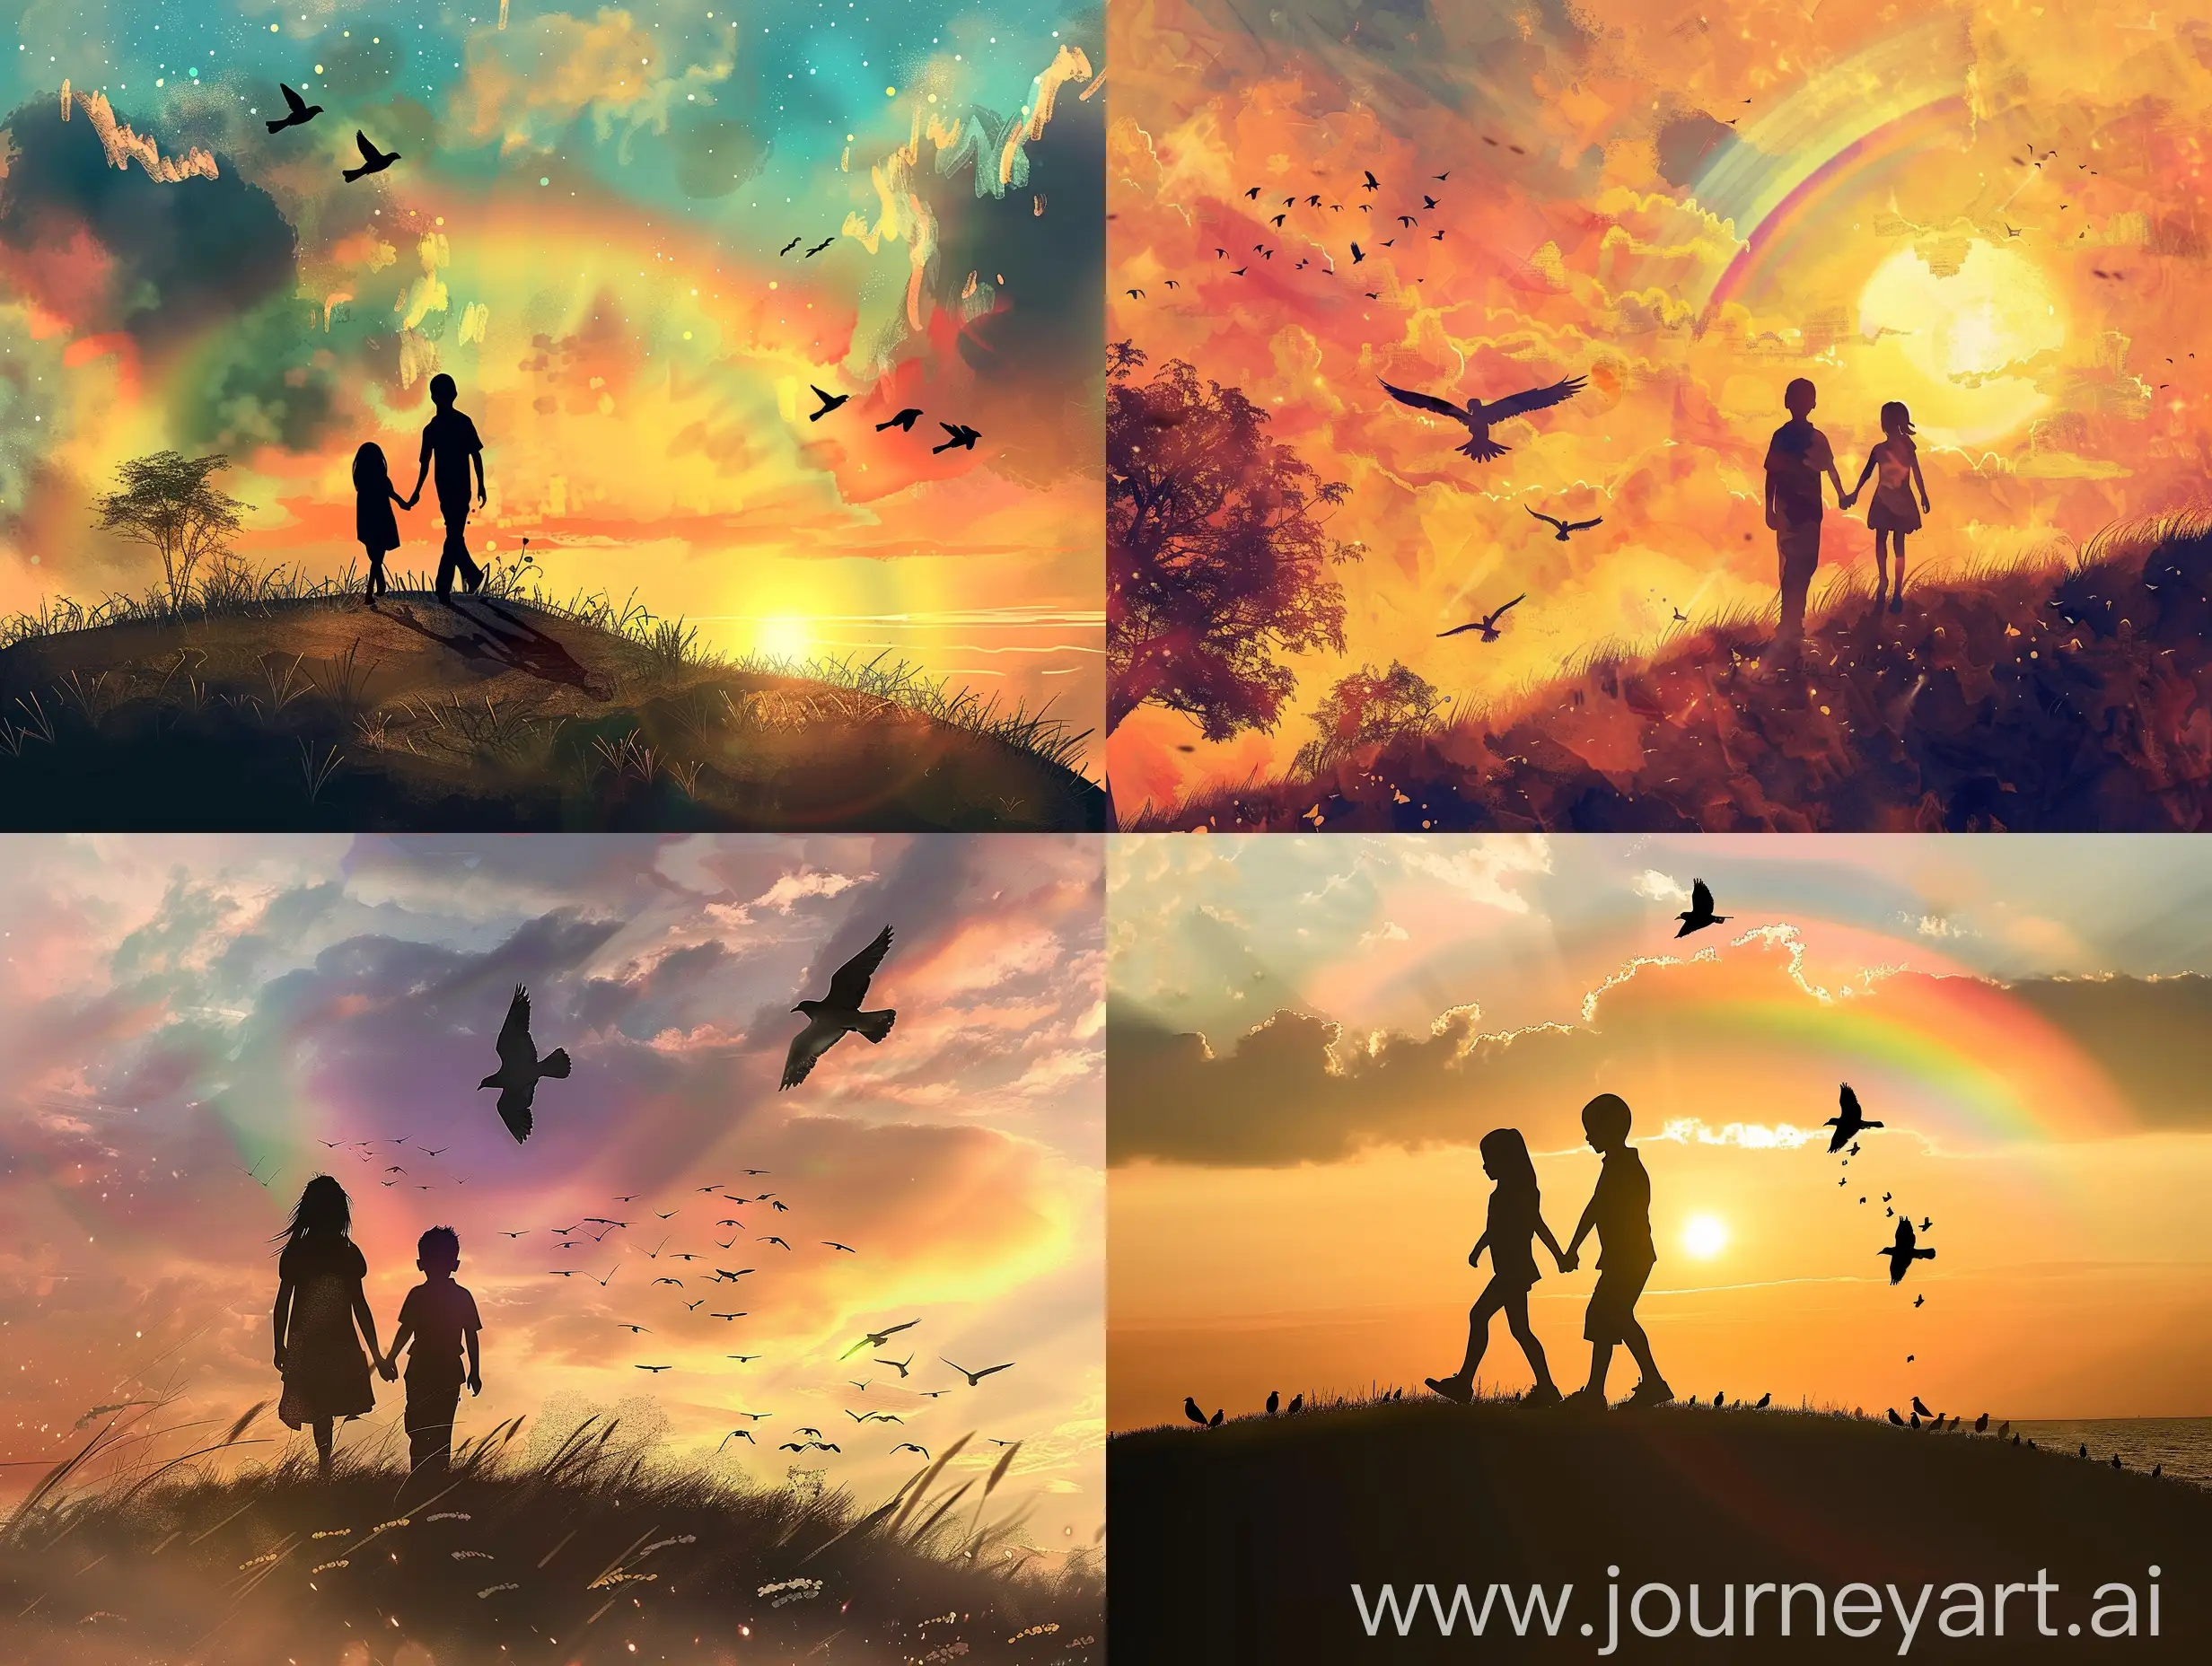 "In the midst of a picturesque season, as the sun bids farewell in a breathtaking sunset, hues of a rainbow adorn the sky. Atop a hill, a boy and a girl stroll hand in hand, trailed by birds soaring overhead, casting playful shadows below."